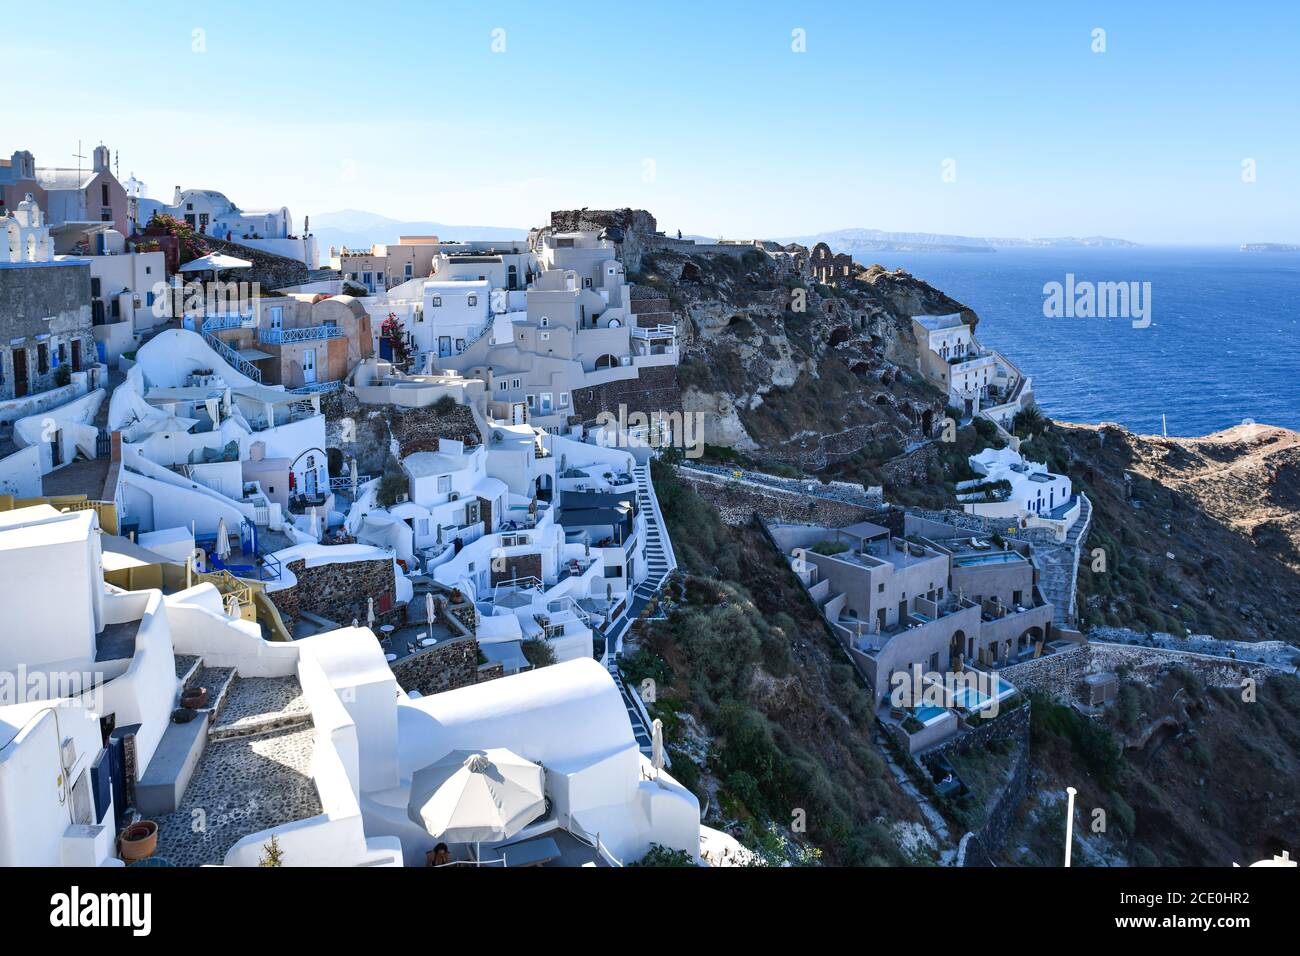 Santorini and its white houses with blue roofs Stock Photo